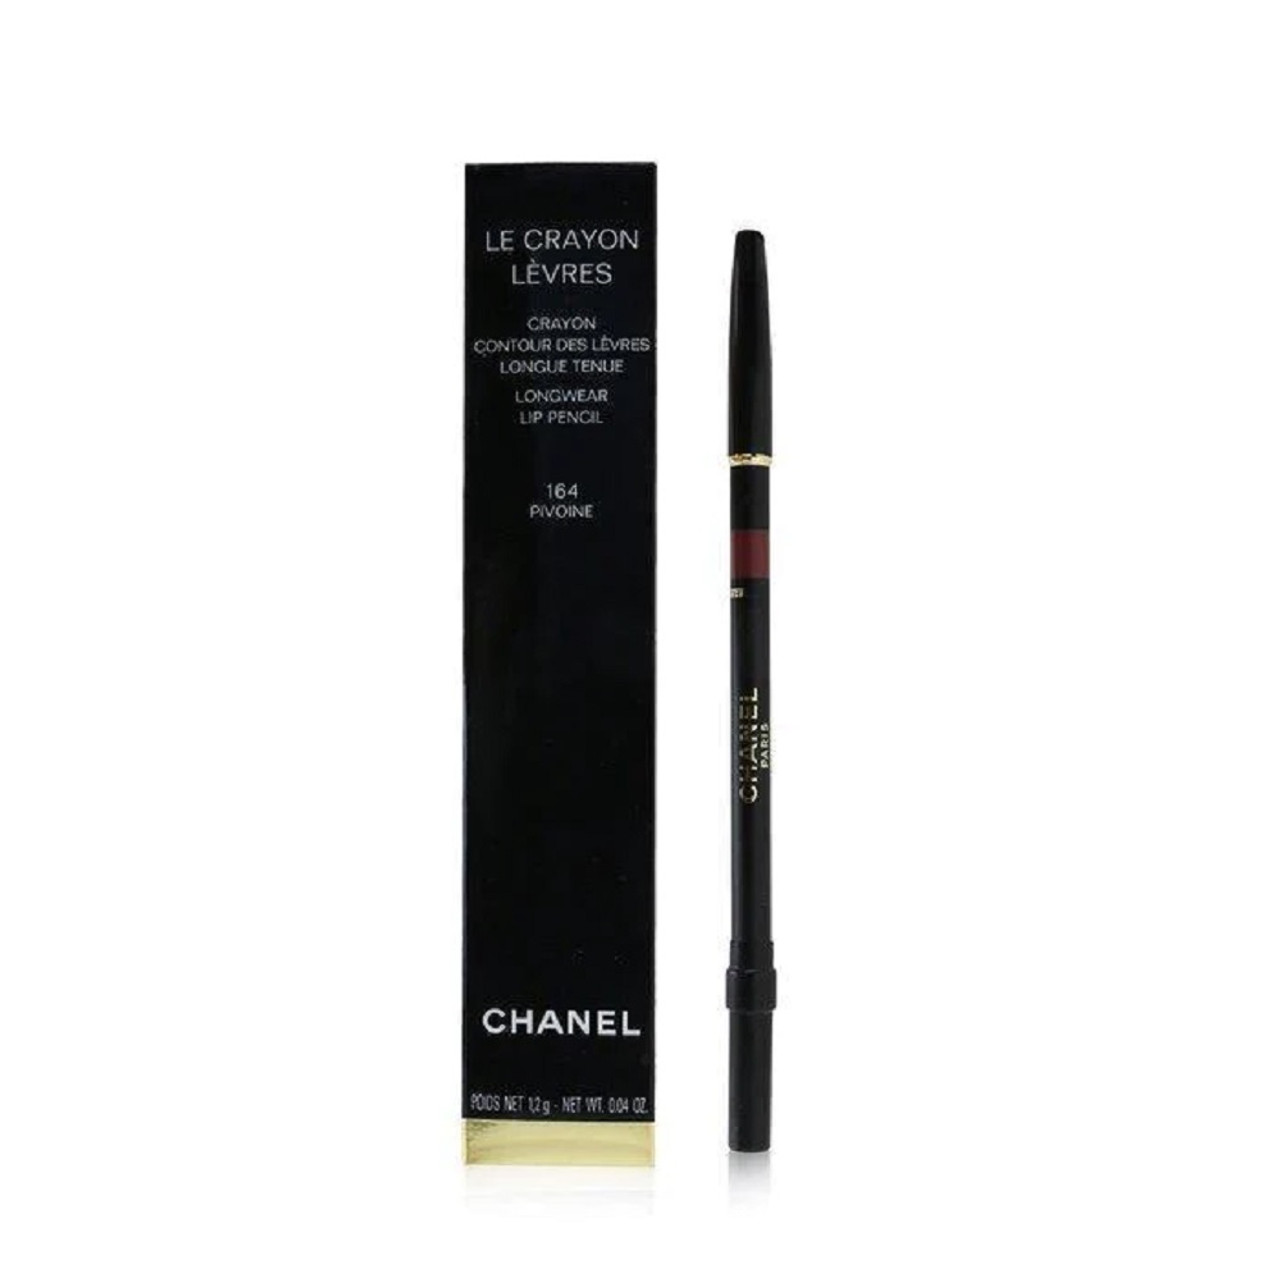 CHANEL Products 